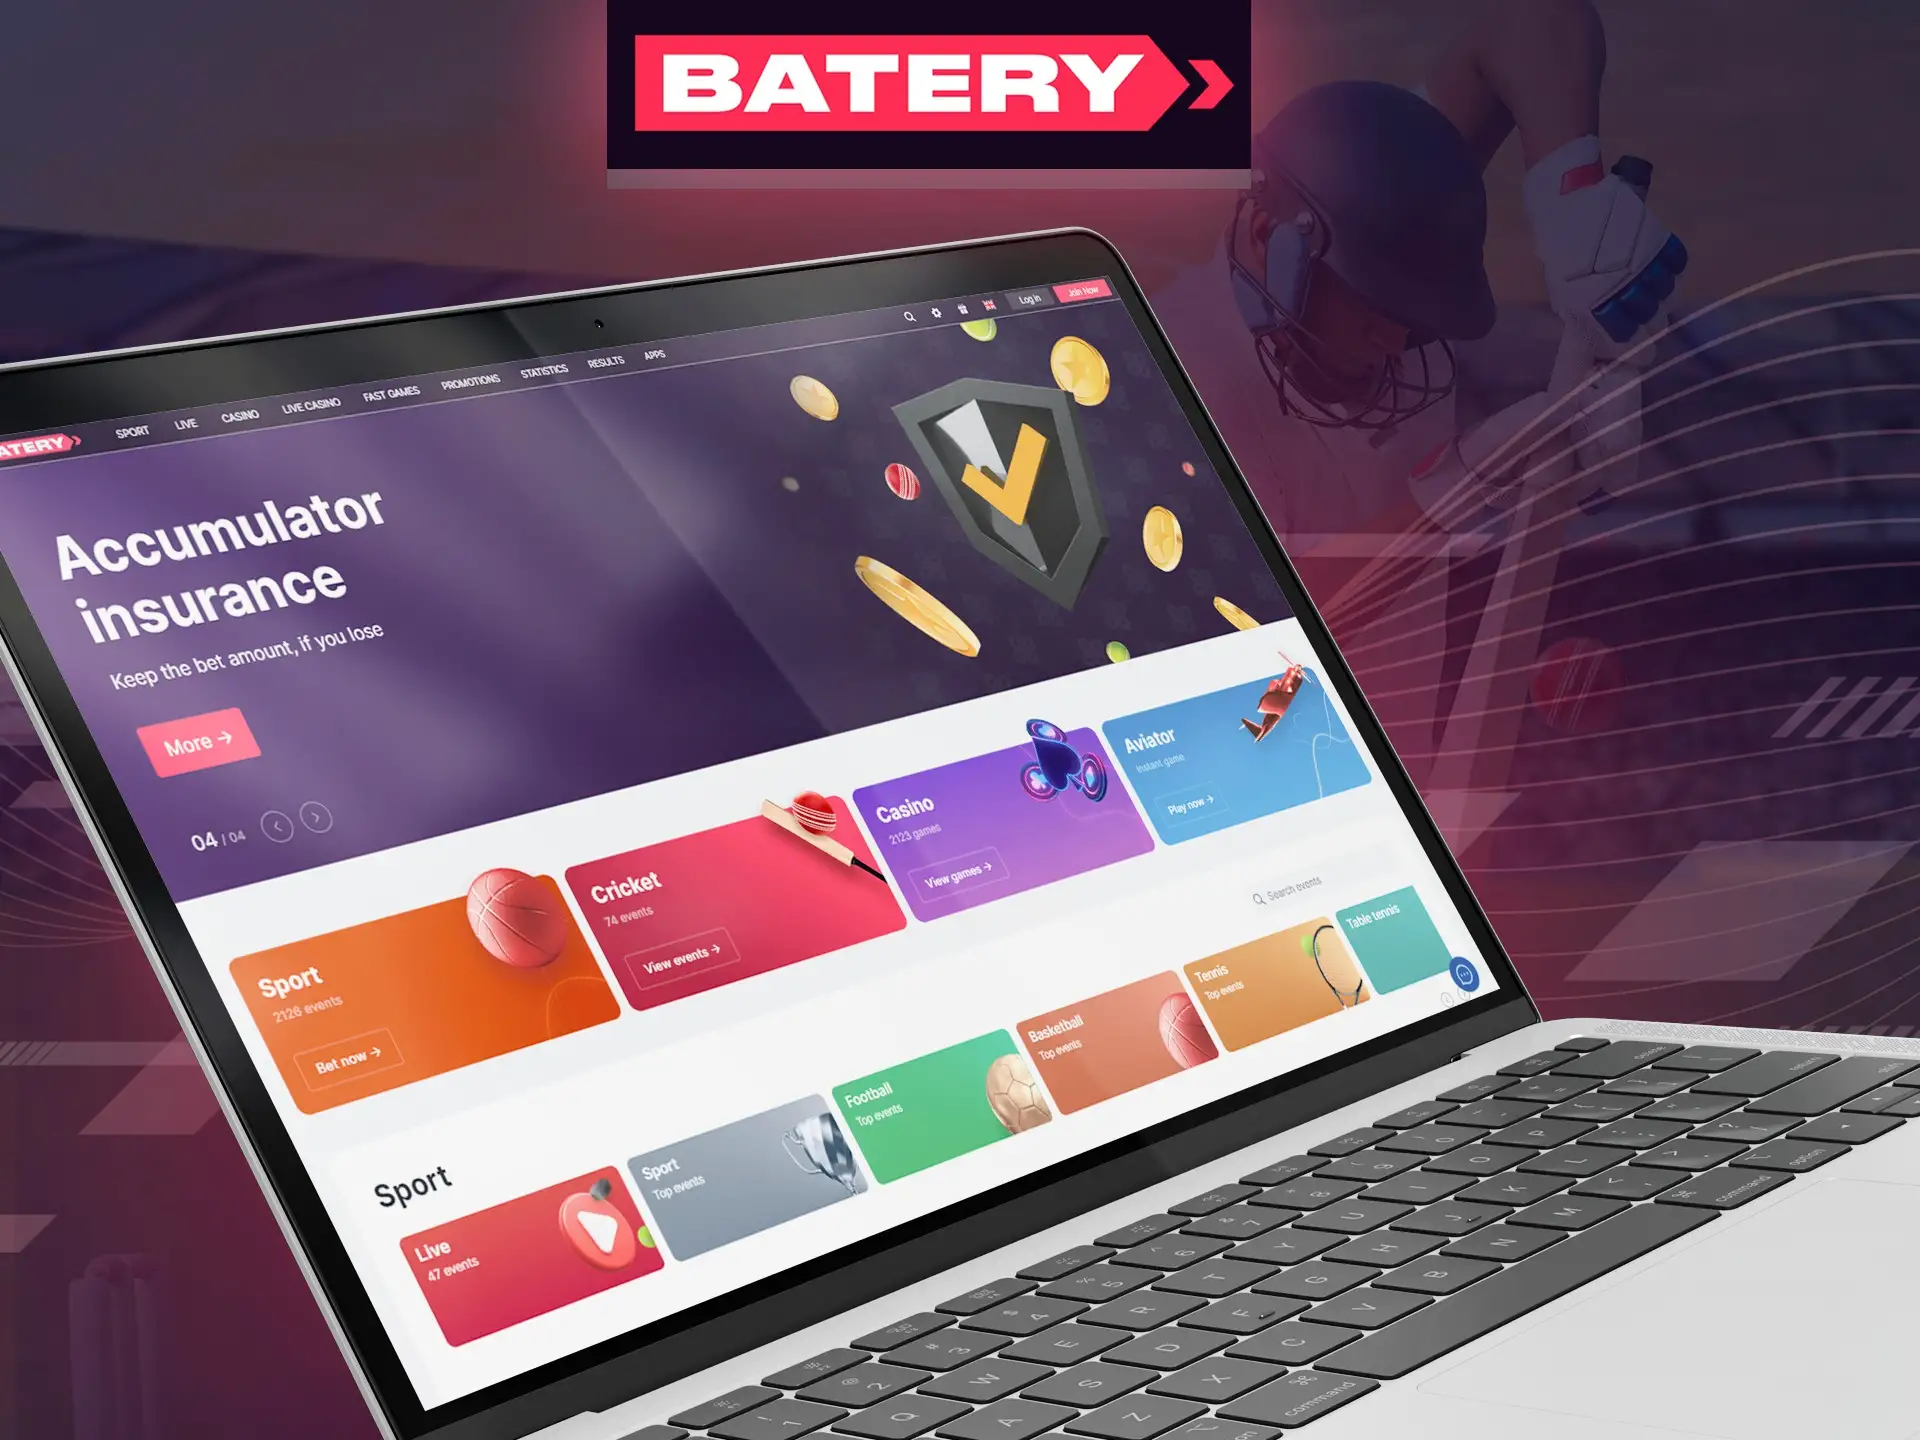 Install Batery PC client and unlock additional features.